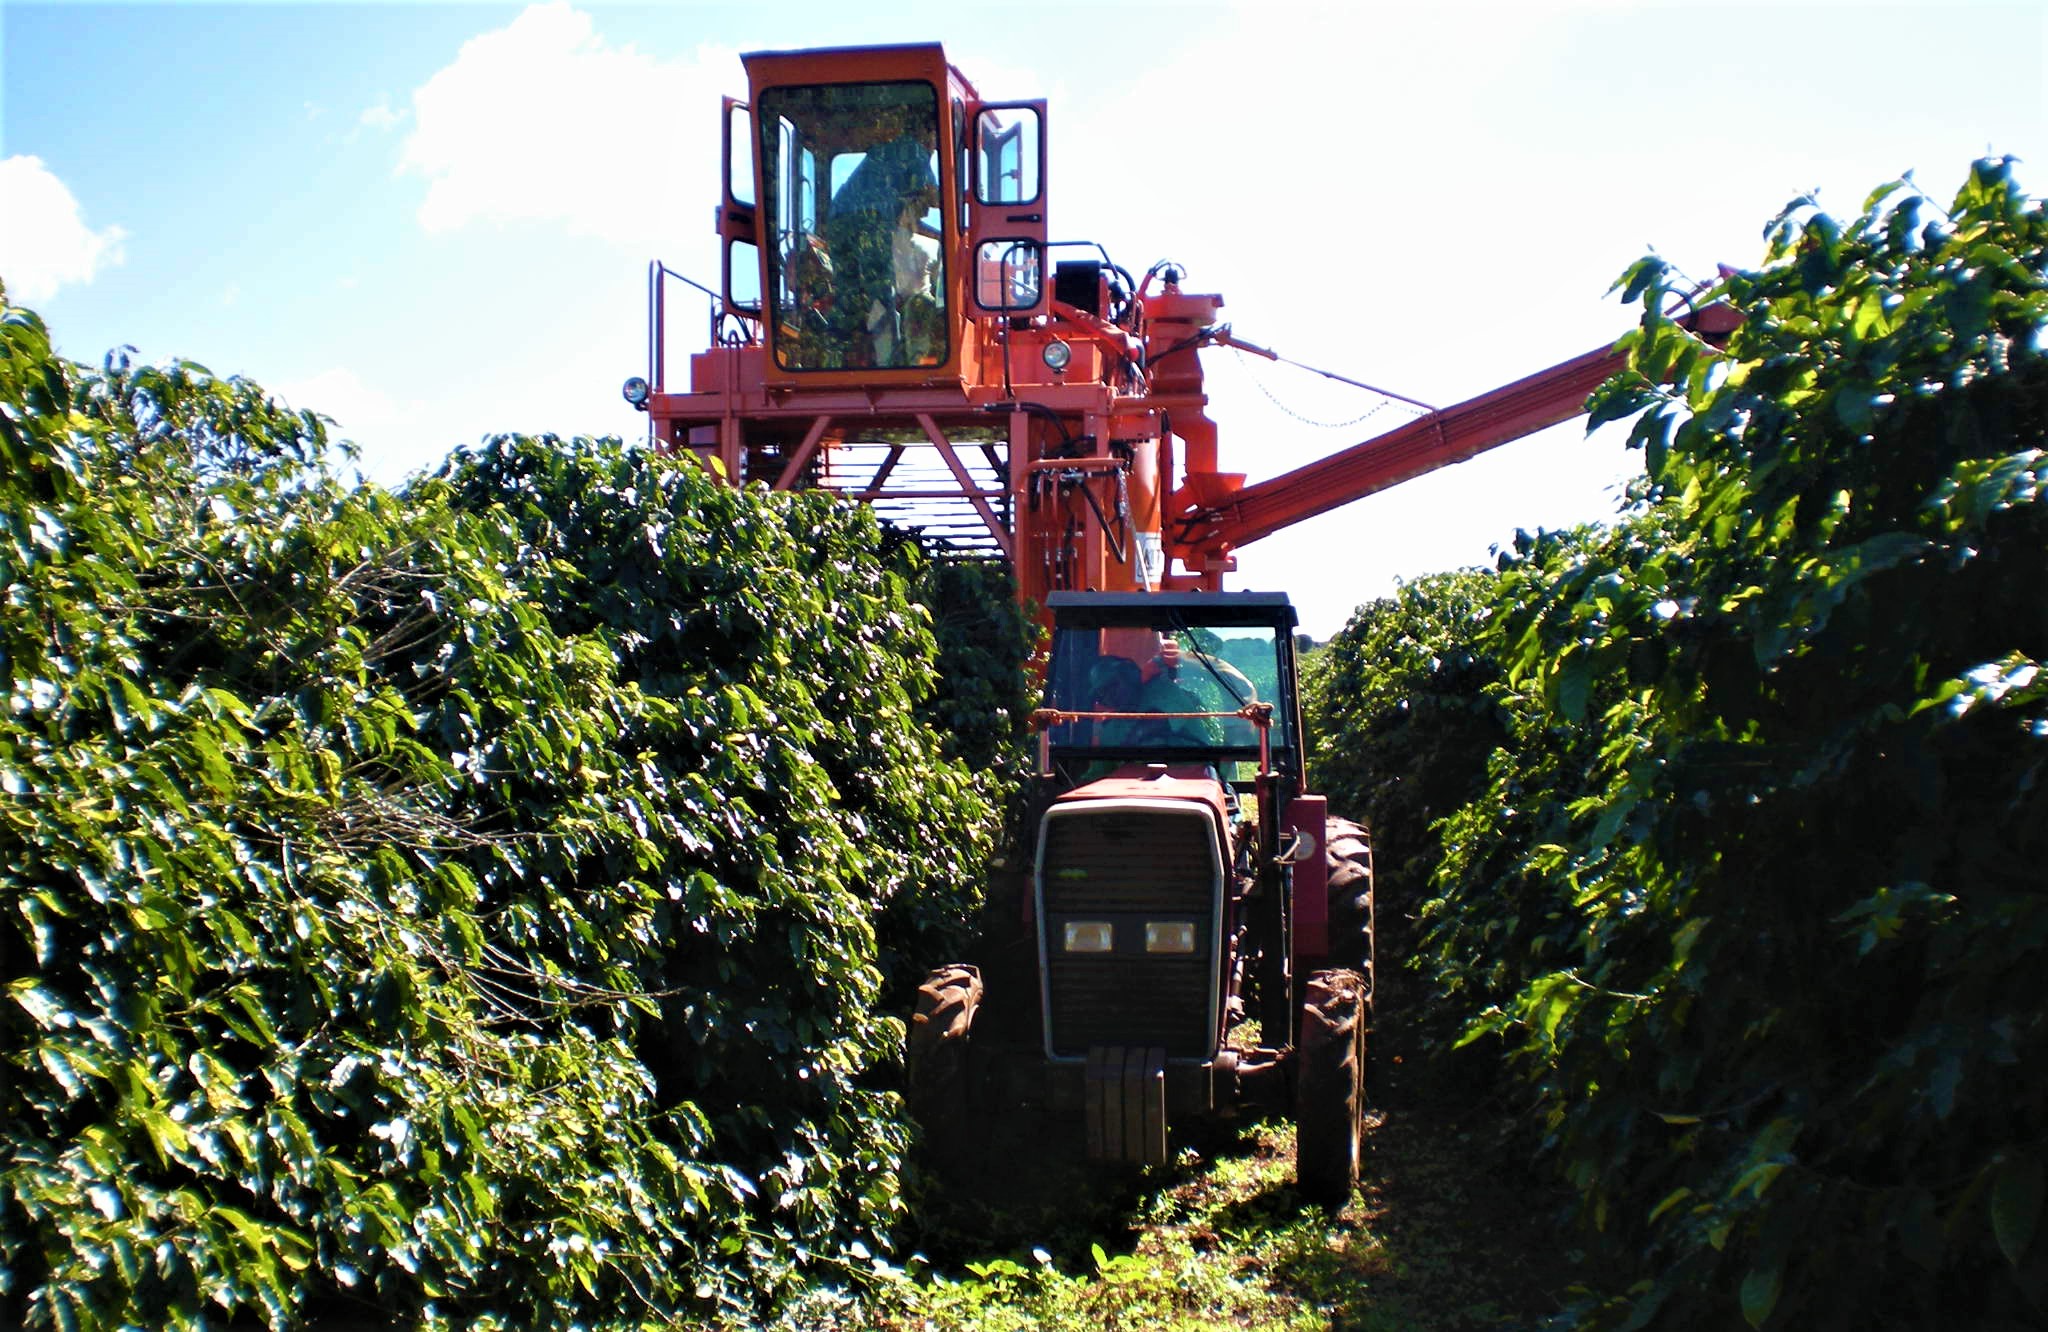 Epamig offers guidance for harvesting coffee